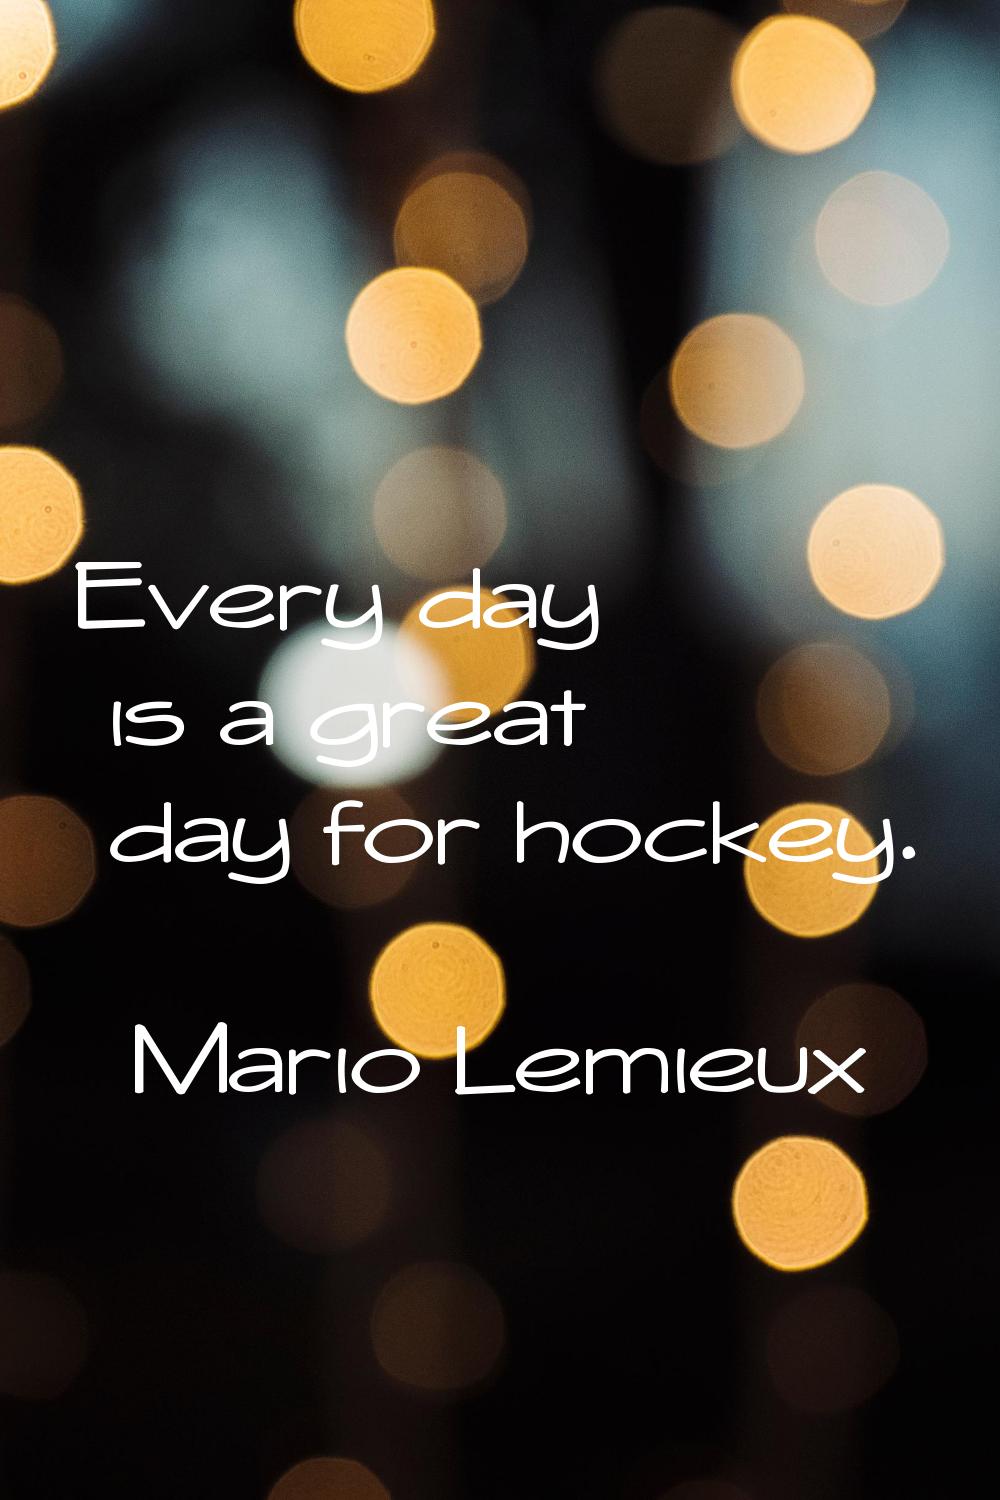 Every day is a great day for hockey.